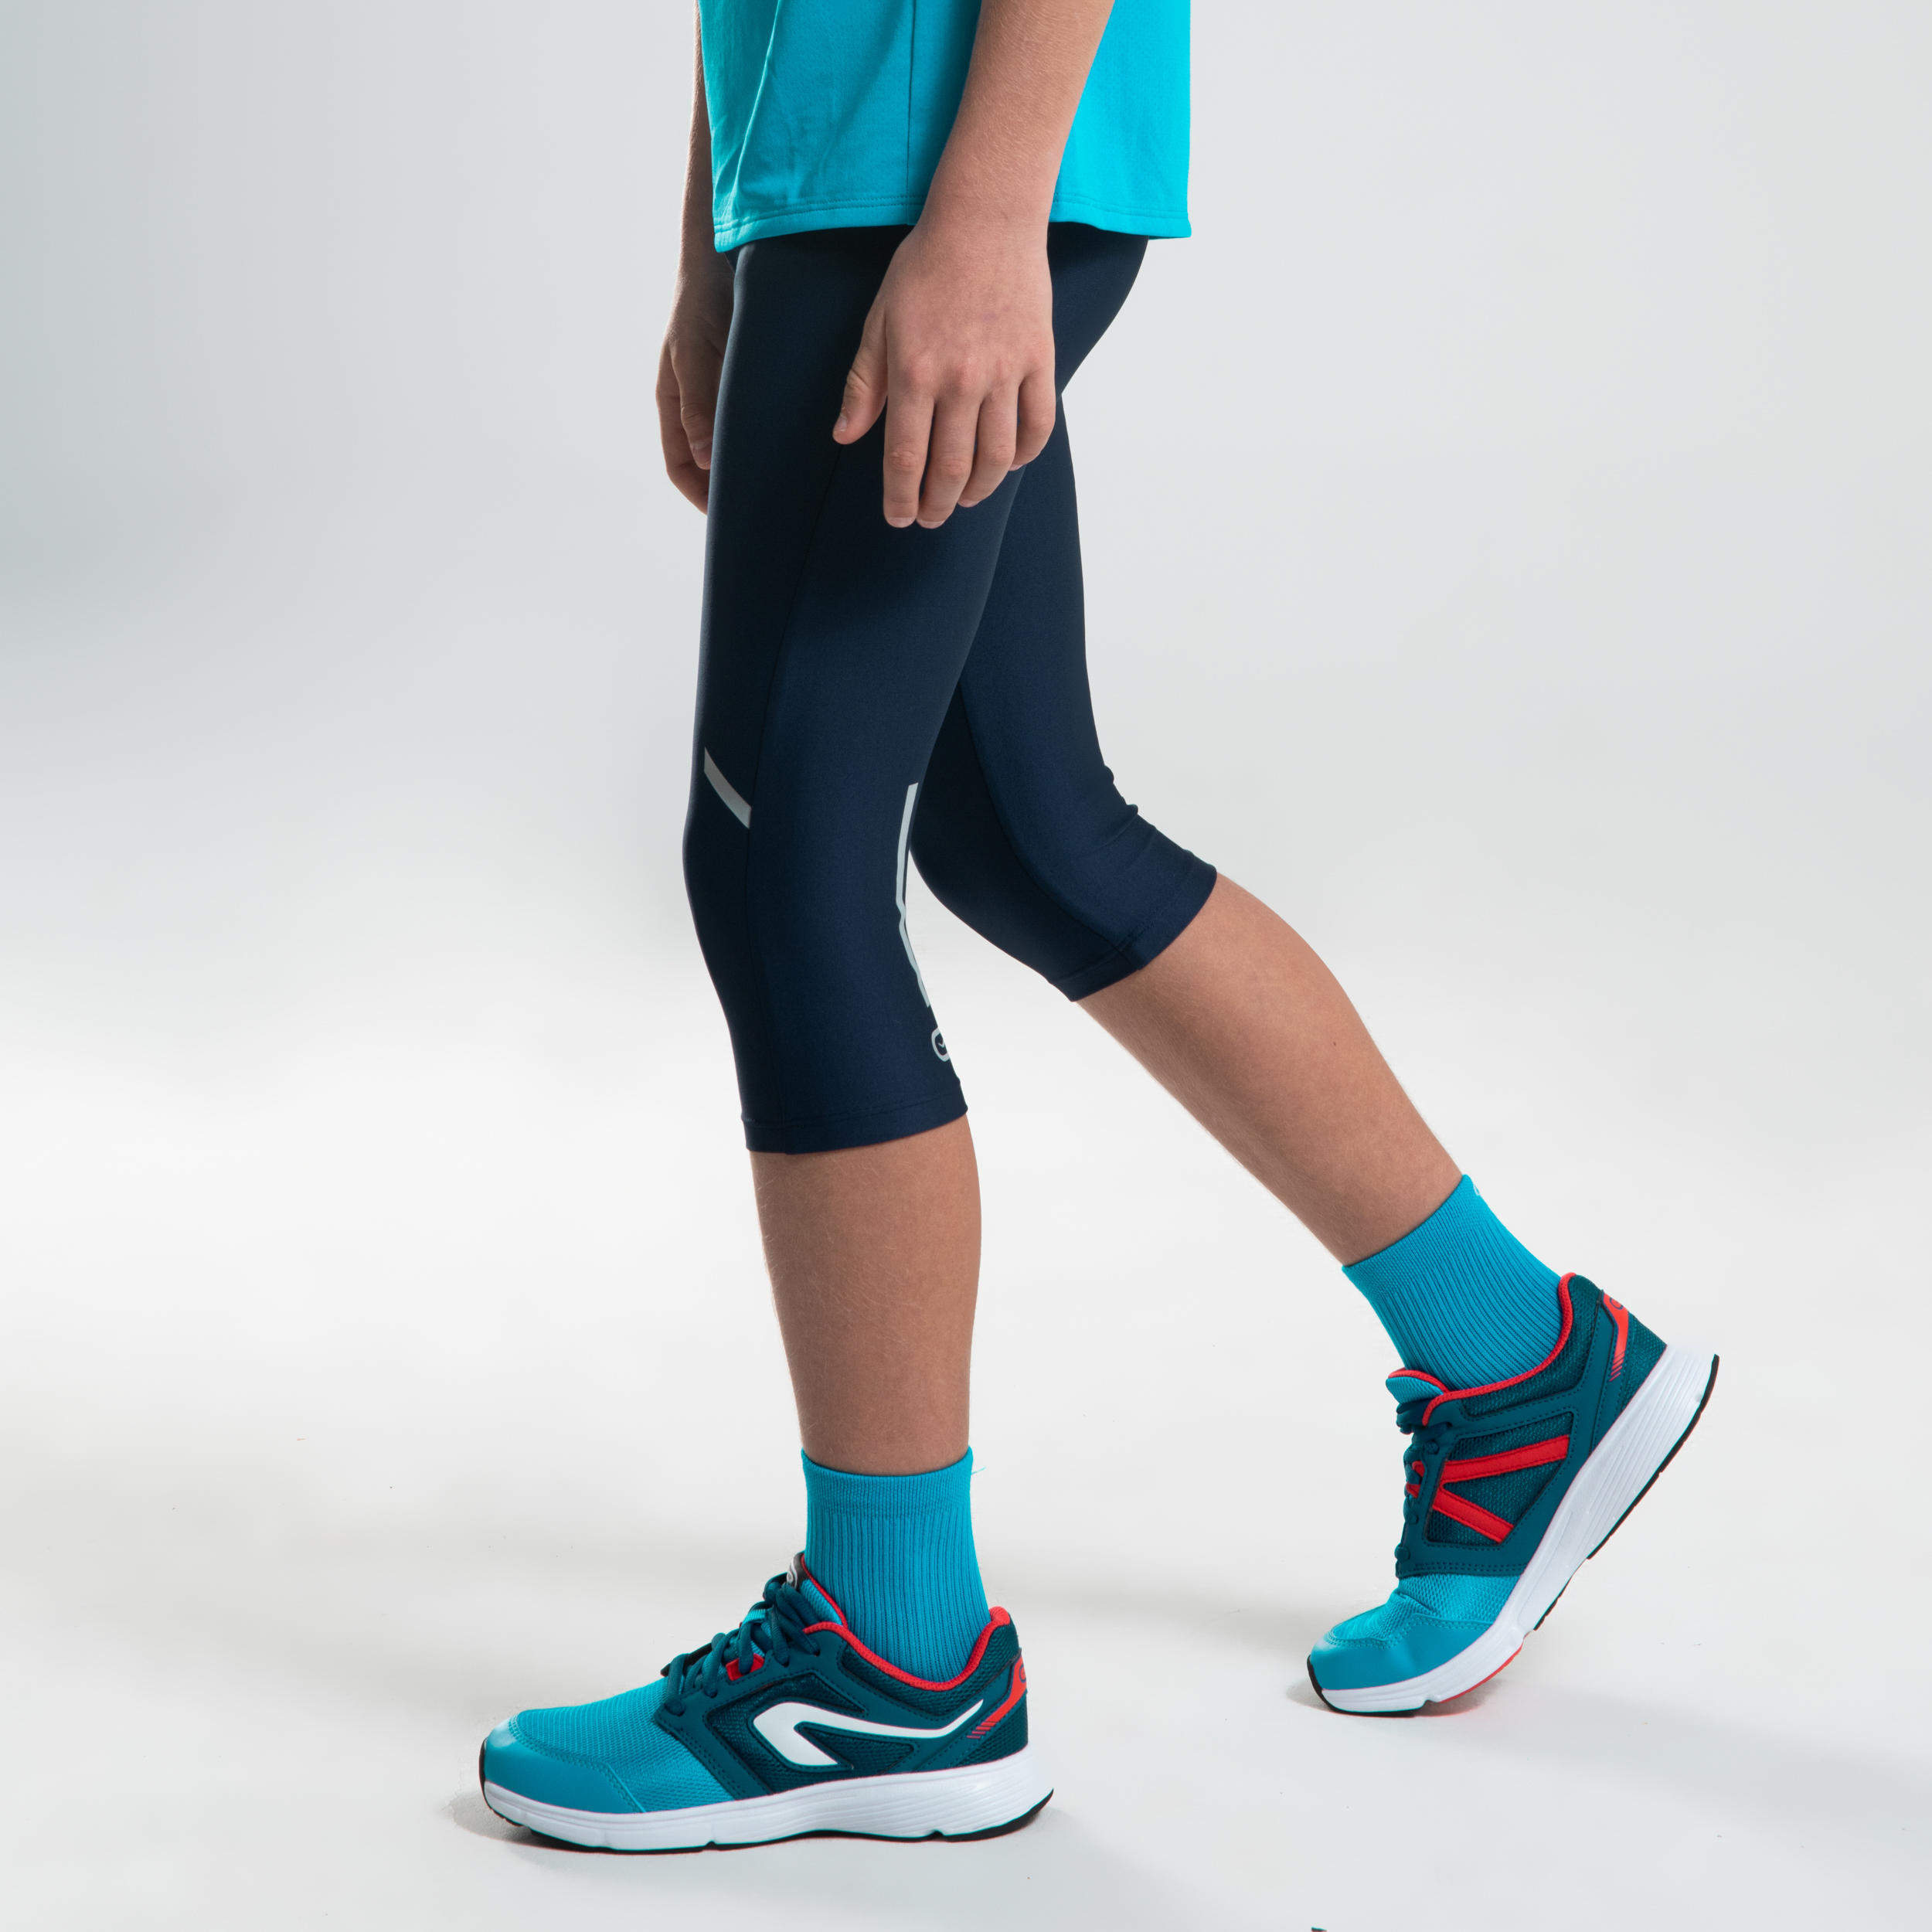 AT 100 KIDS' ATHLETICS CROPPED BOTTOMS - NAVY BLUE/TURQUOISE 6/6